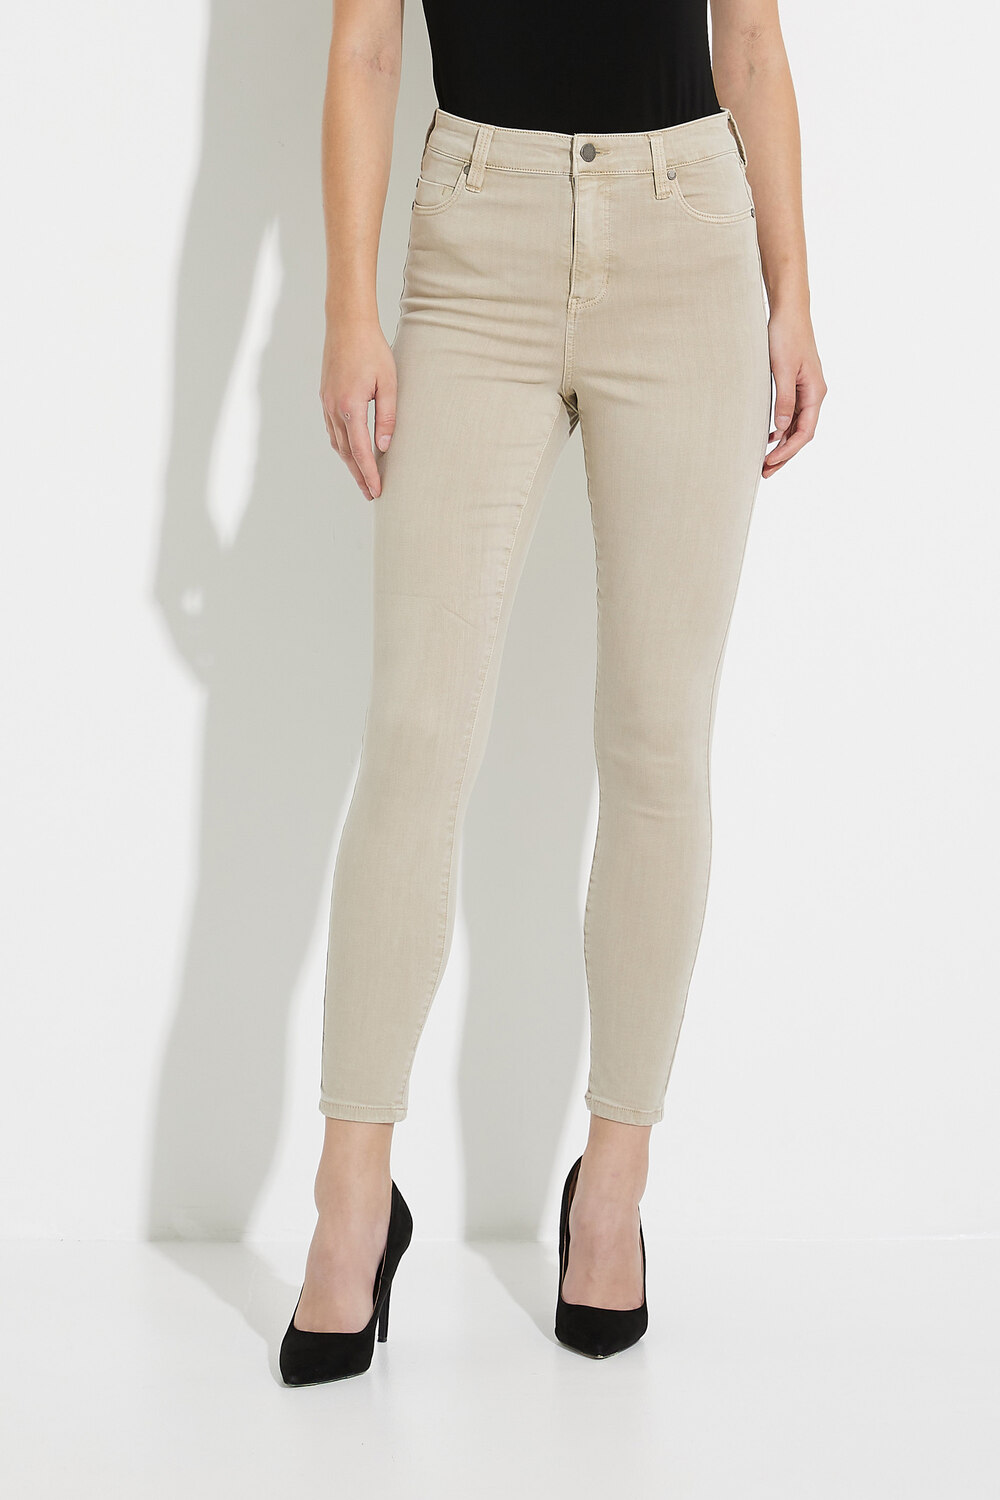 High-Rise Ankle Skinny Jeans Style LM2100F81. Chai Tan